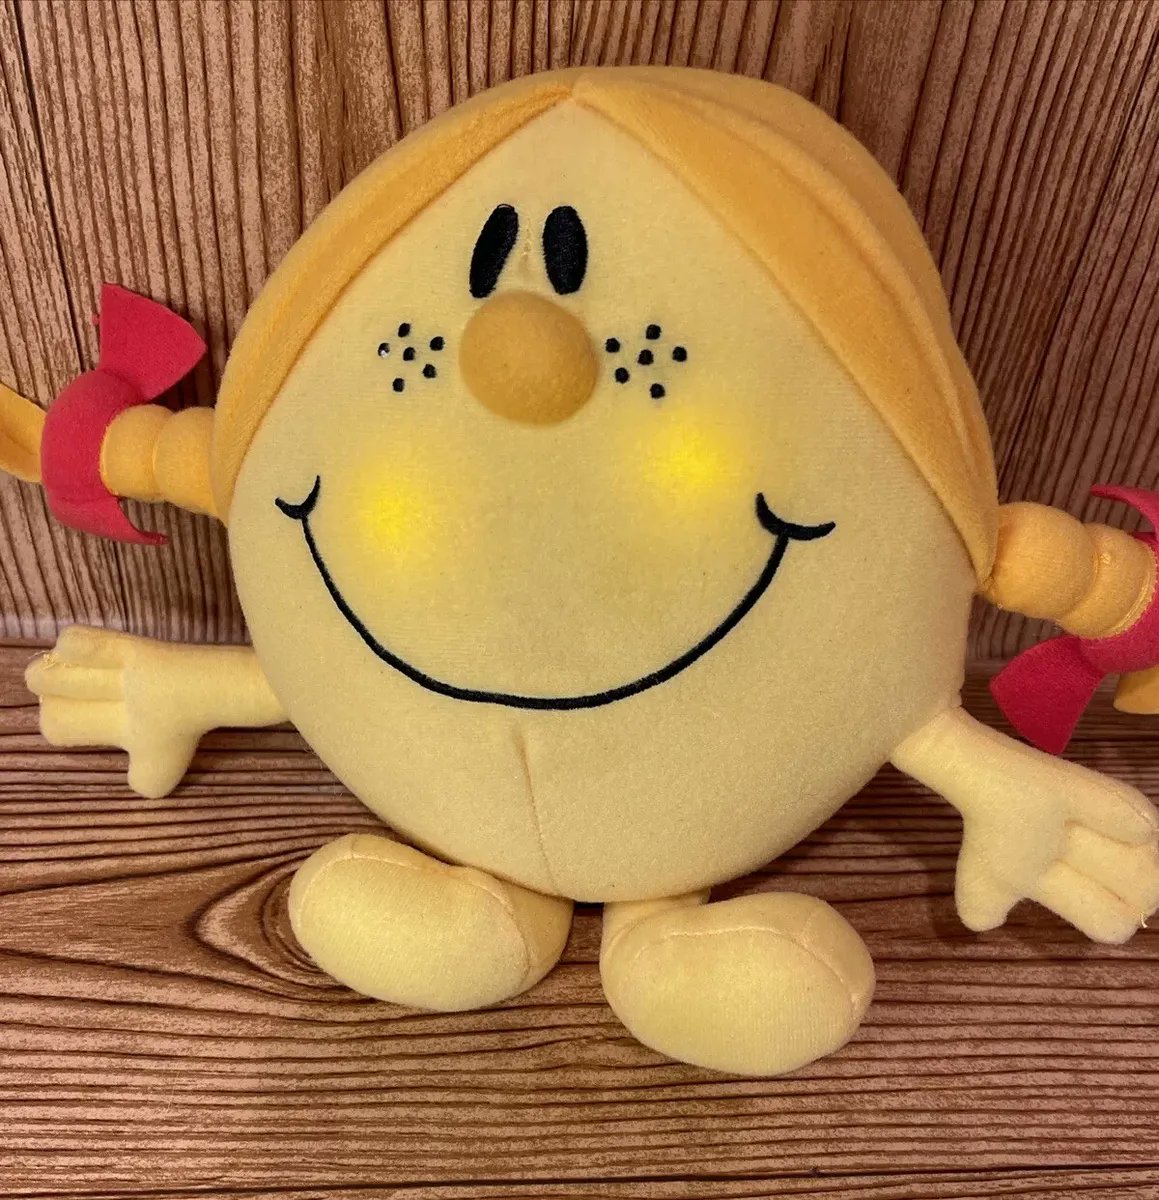 💛Today's plush of the day is Little Miss Sunshine from Mr Men!💛